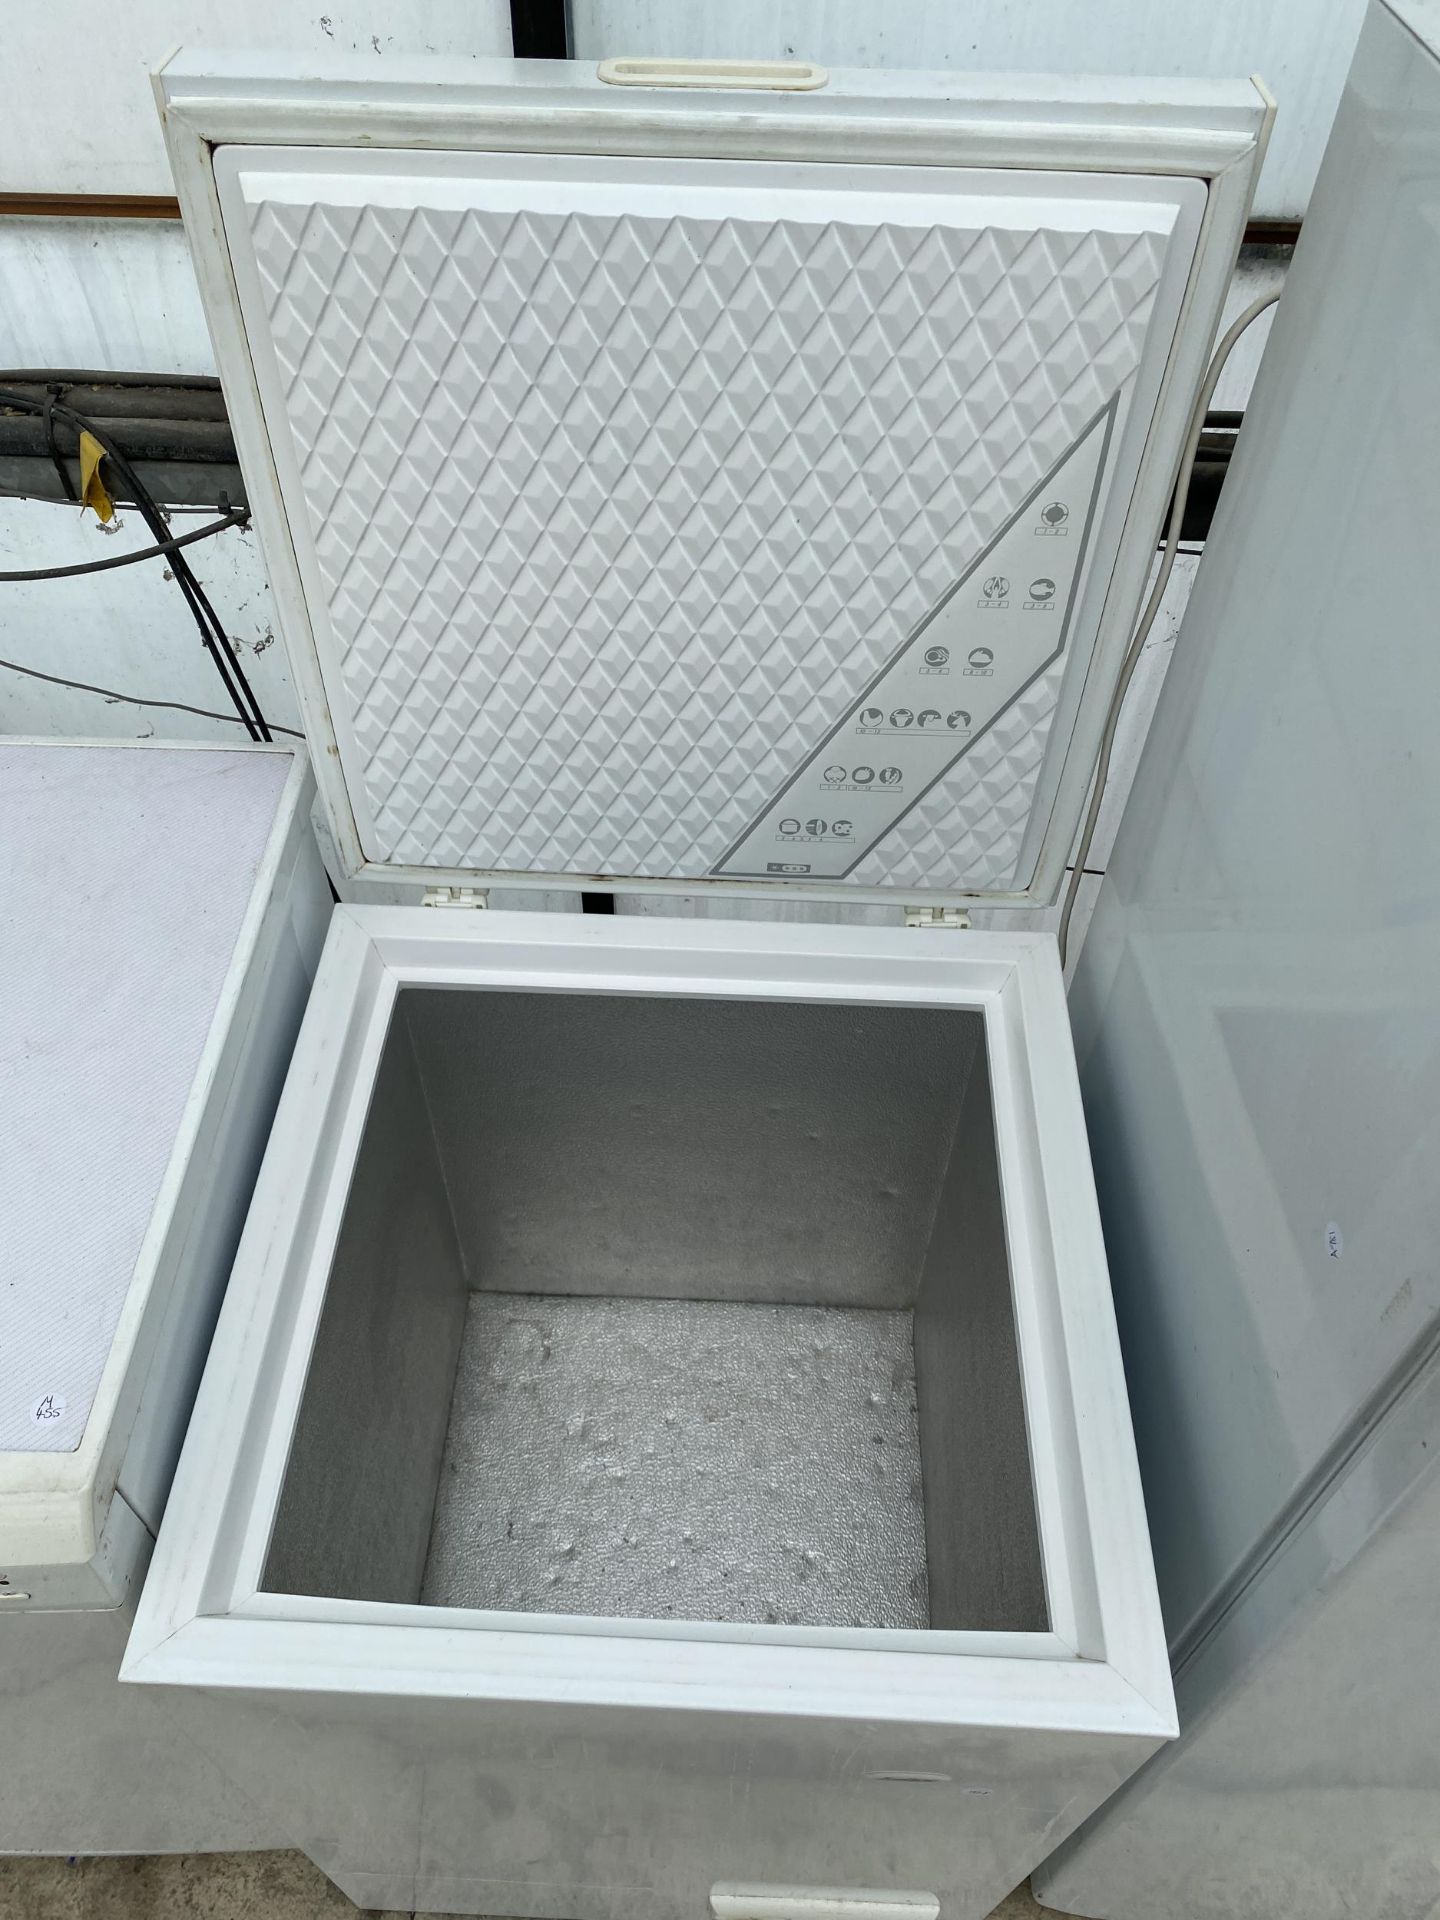 A SMALL WHITE CHEST FREEZER - Image 2 of 2